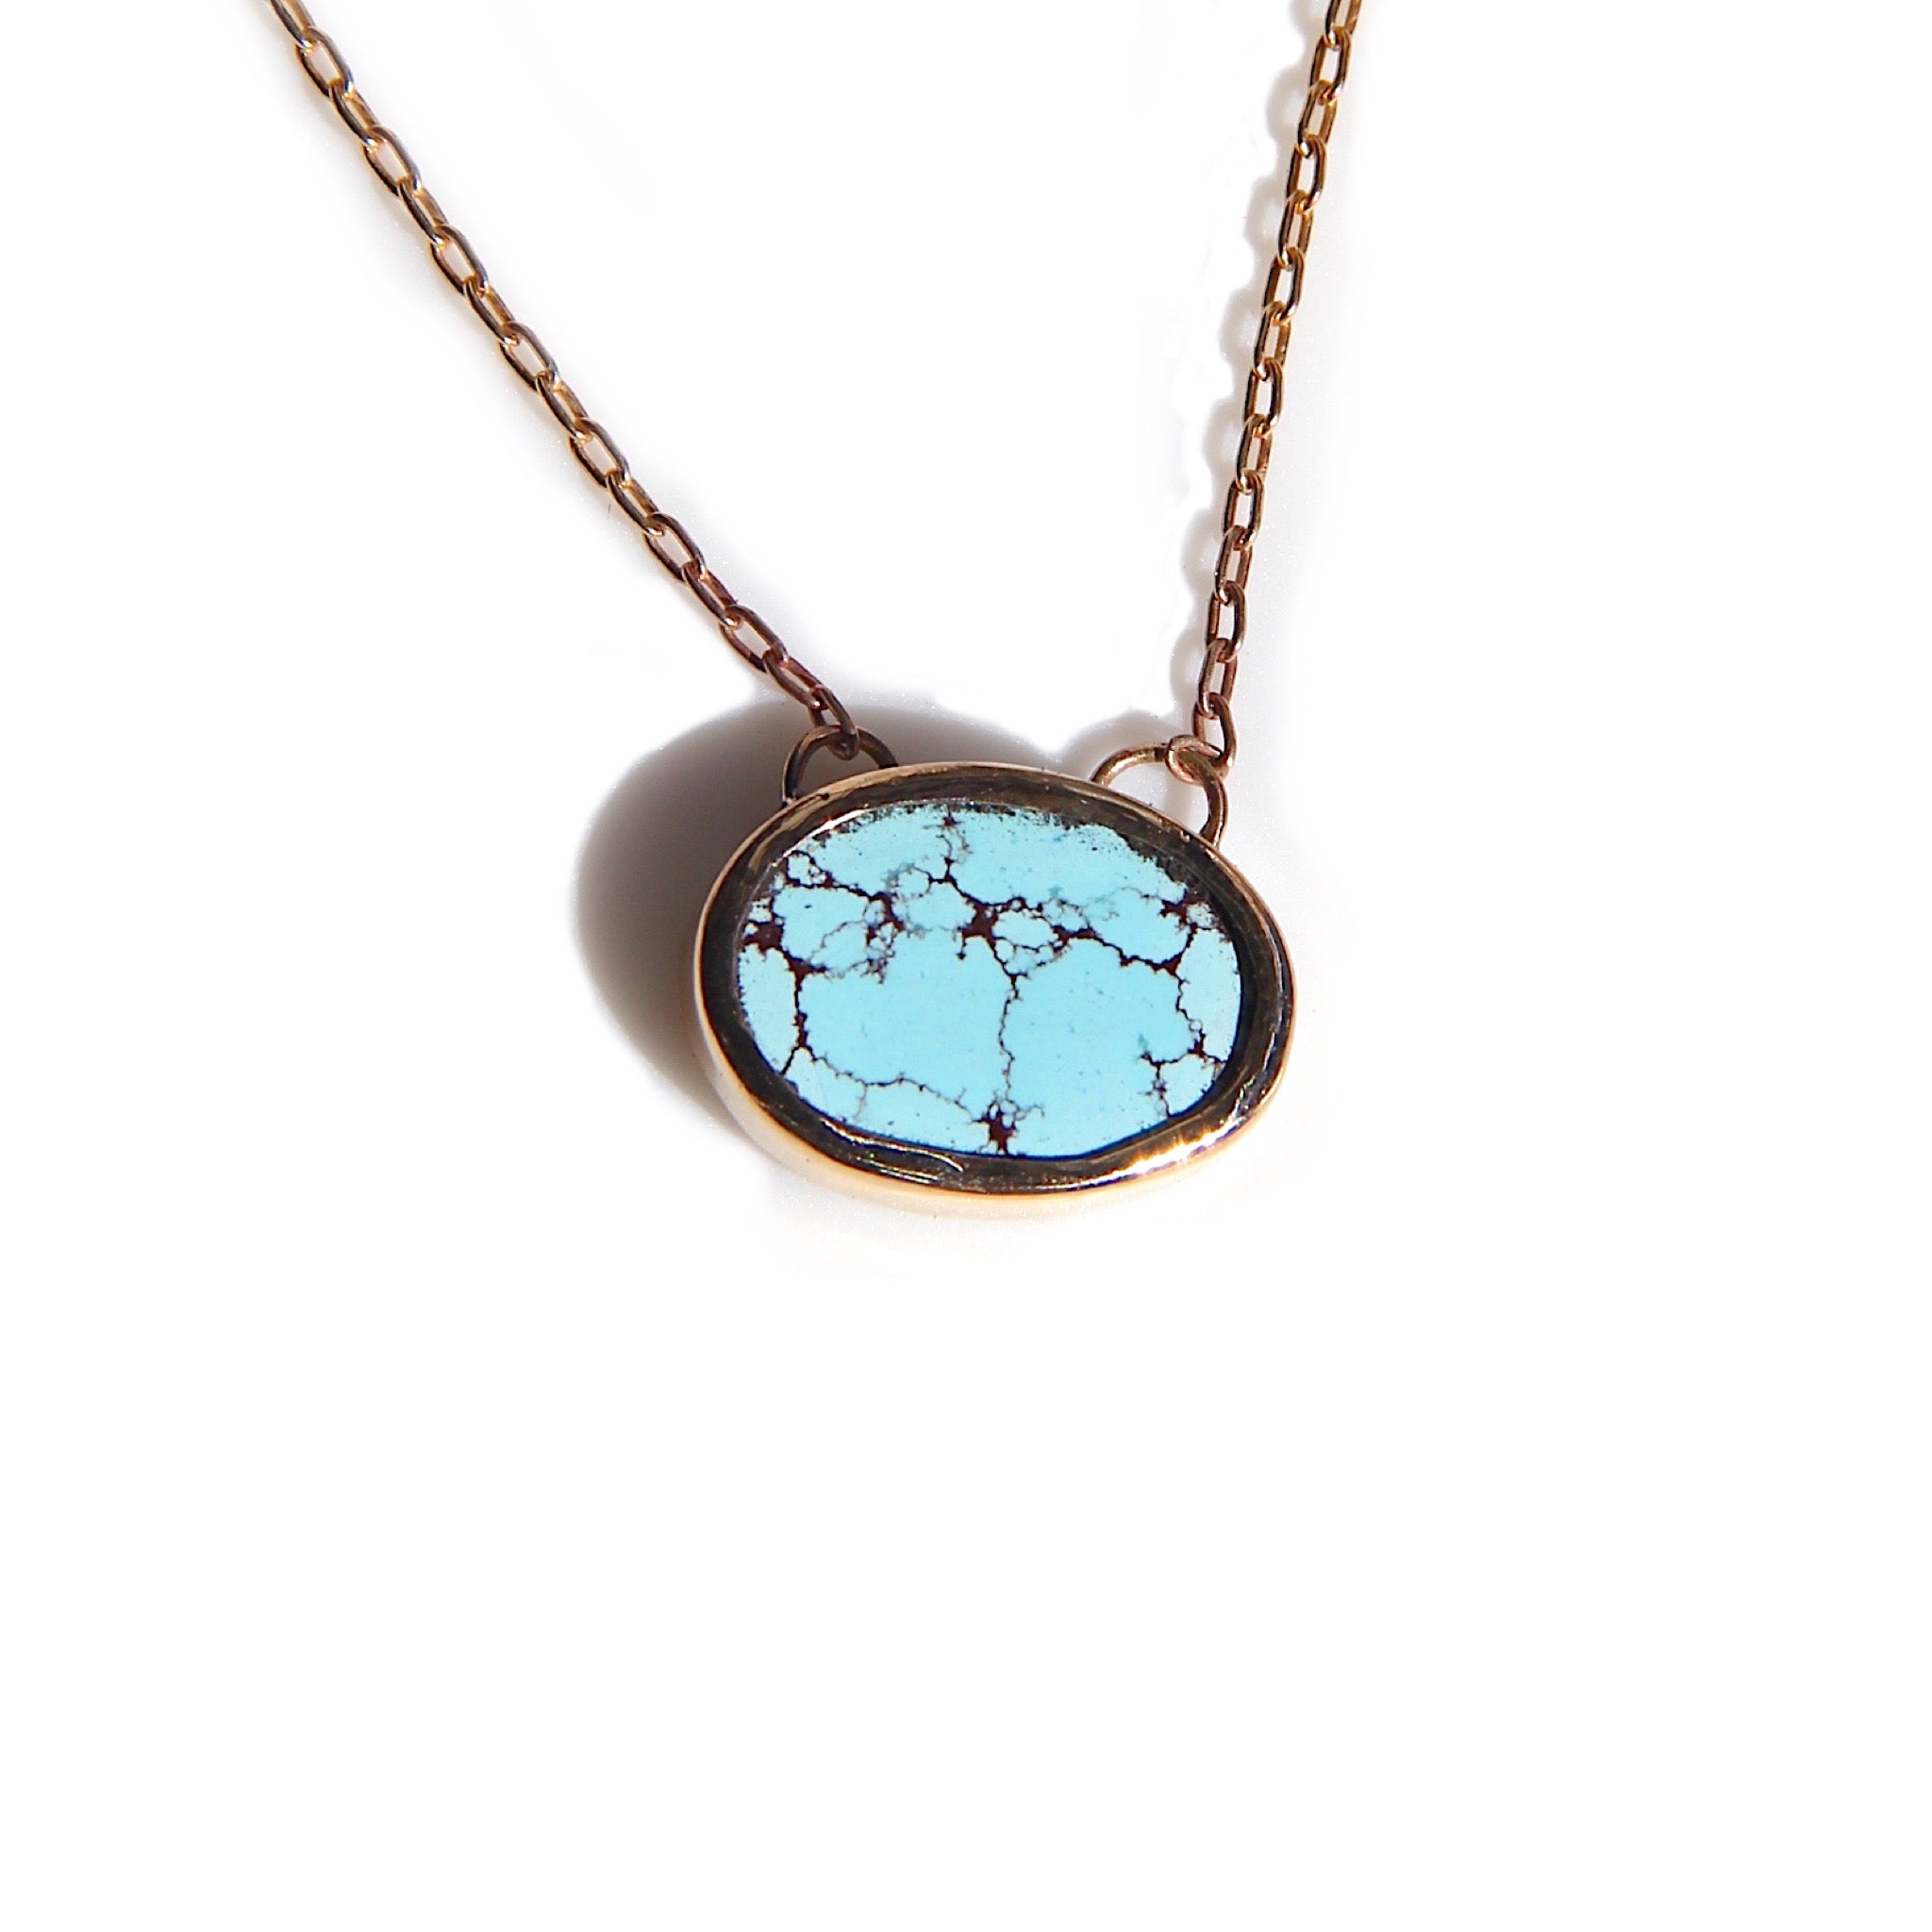 Lavender Turquoise necklace